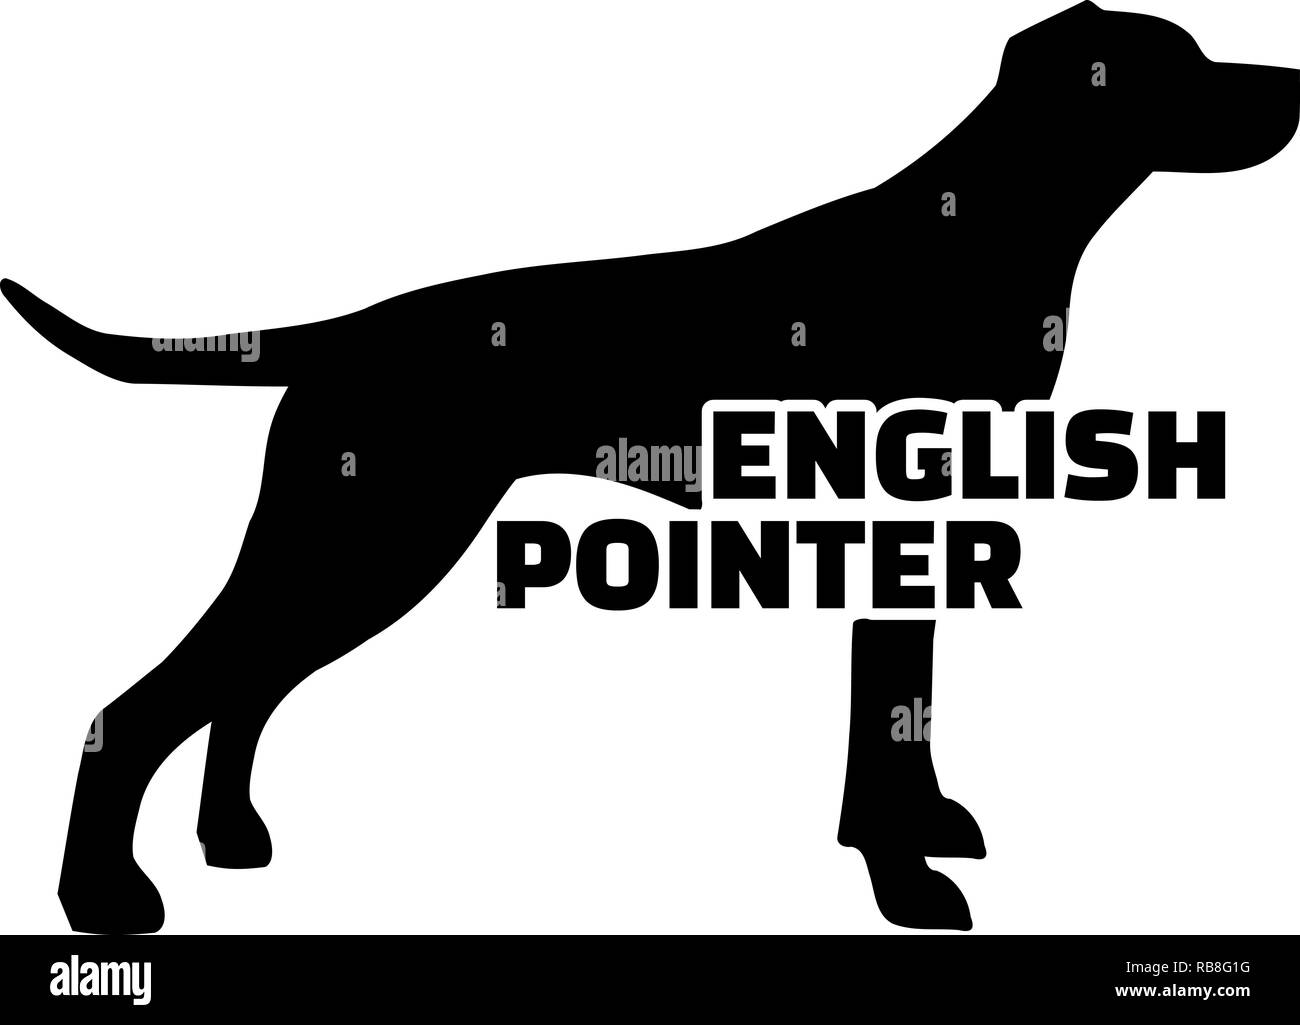 English Pointer silhouette real with word Stock Photo